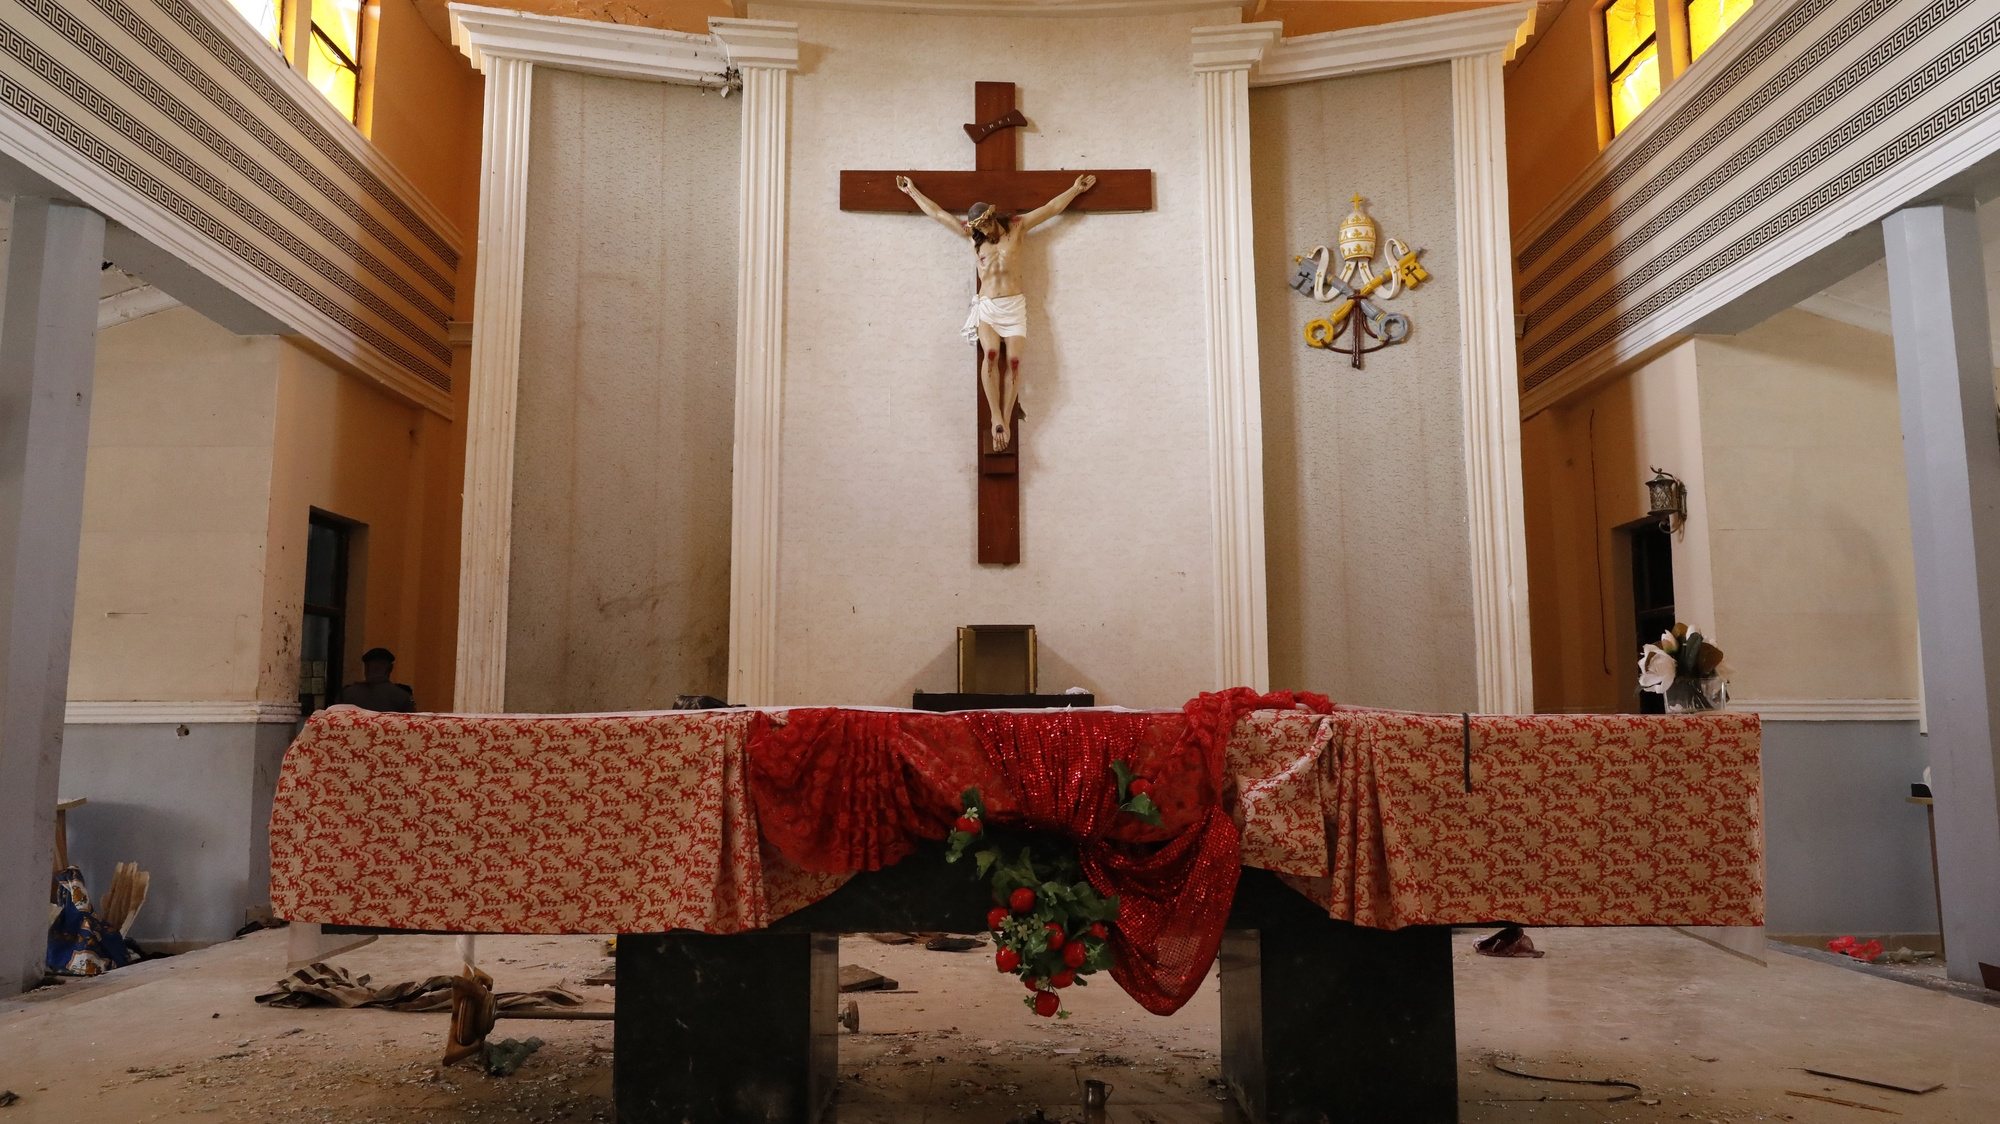 epa09999603 A cross on the altar stained with blood inside the St. Francis Catholic church a day after an attack by gunmen on worshippers during a Sunday service mass in Owo, Ondo state, Nigeria, 06 June 2022. According to Ondo state authorities over 50 people were killed and numerous others injured in the attack on the St. Francis Catholic church in Owo town, southwest Nigeria, during Pentecost Sunday mass on 05 June 2022.  EPA/STRINGER